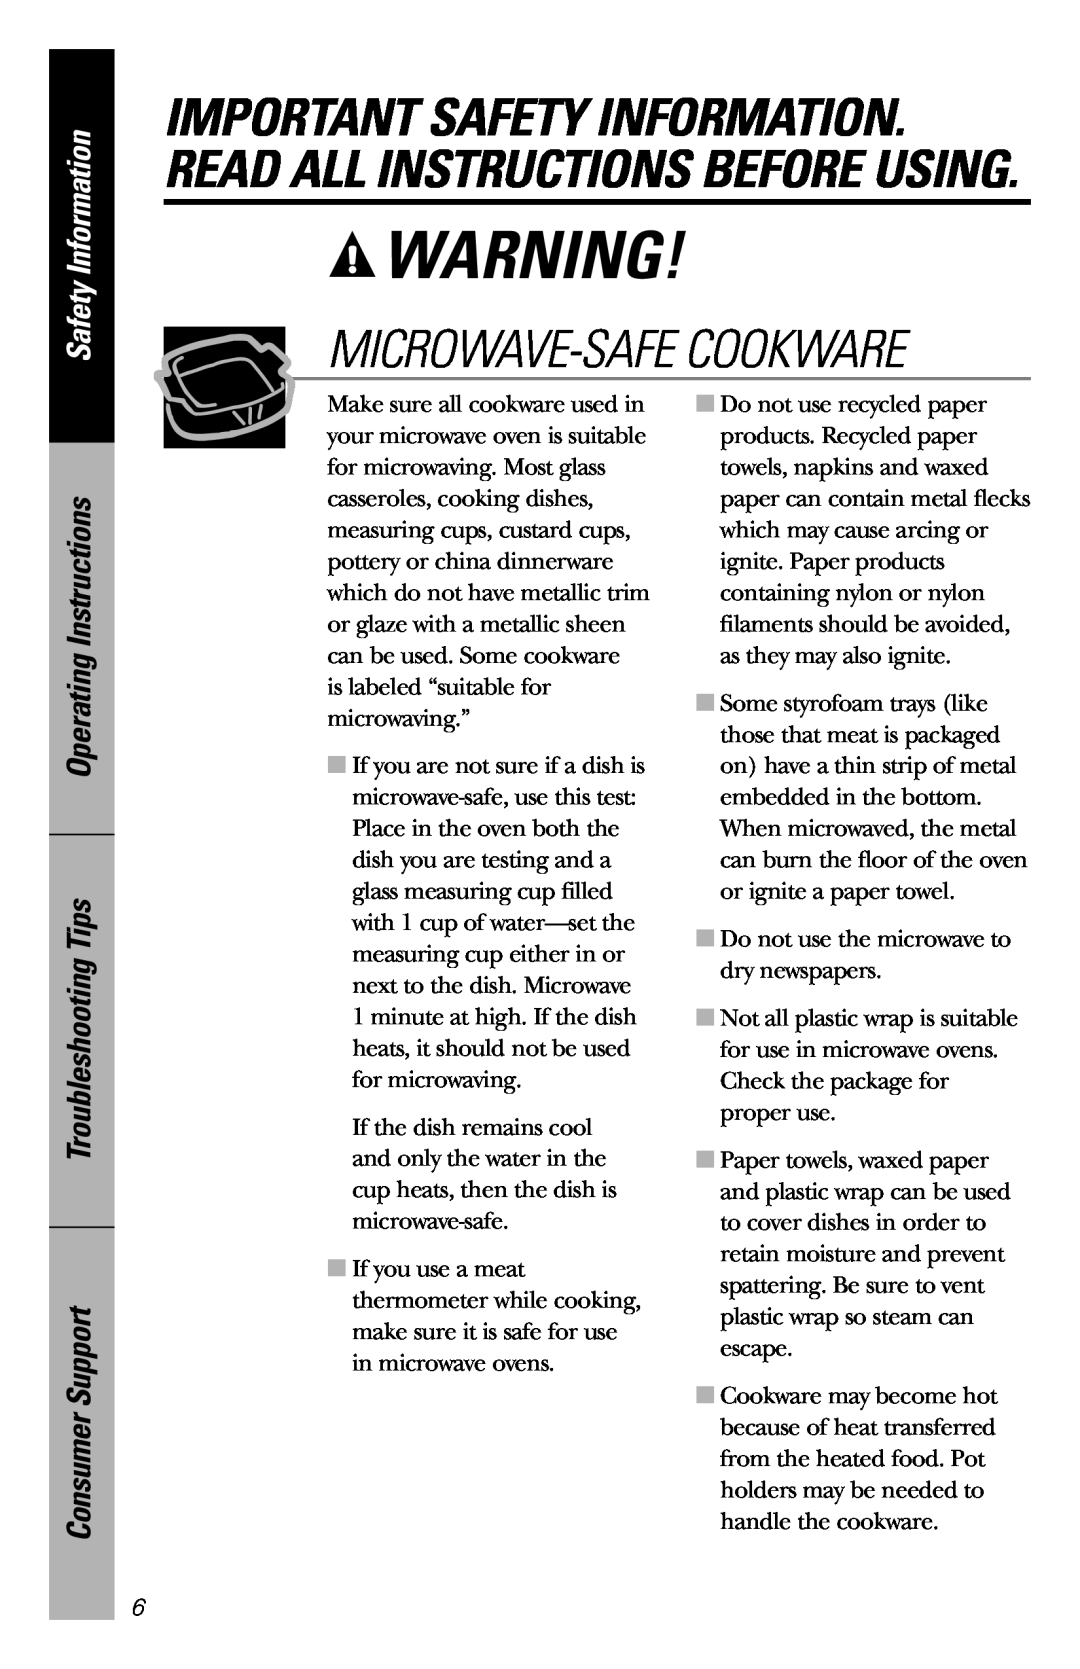 GE JES831 Microwave-Safe Cookware, Operating Instructions Troubleshooting Tips Consumer Support, Safety Information 